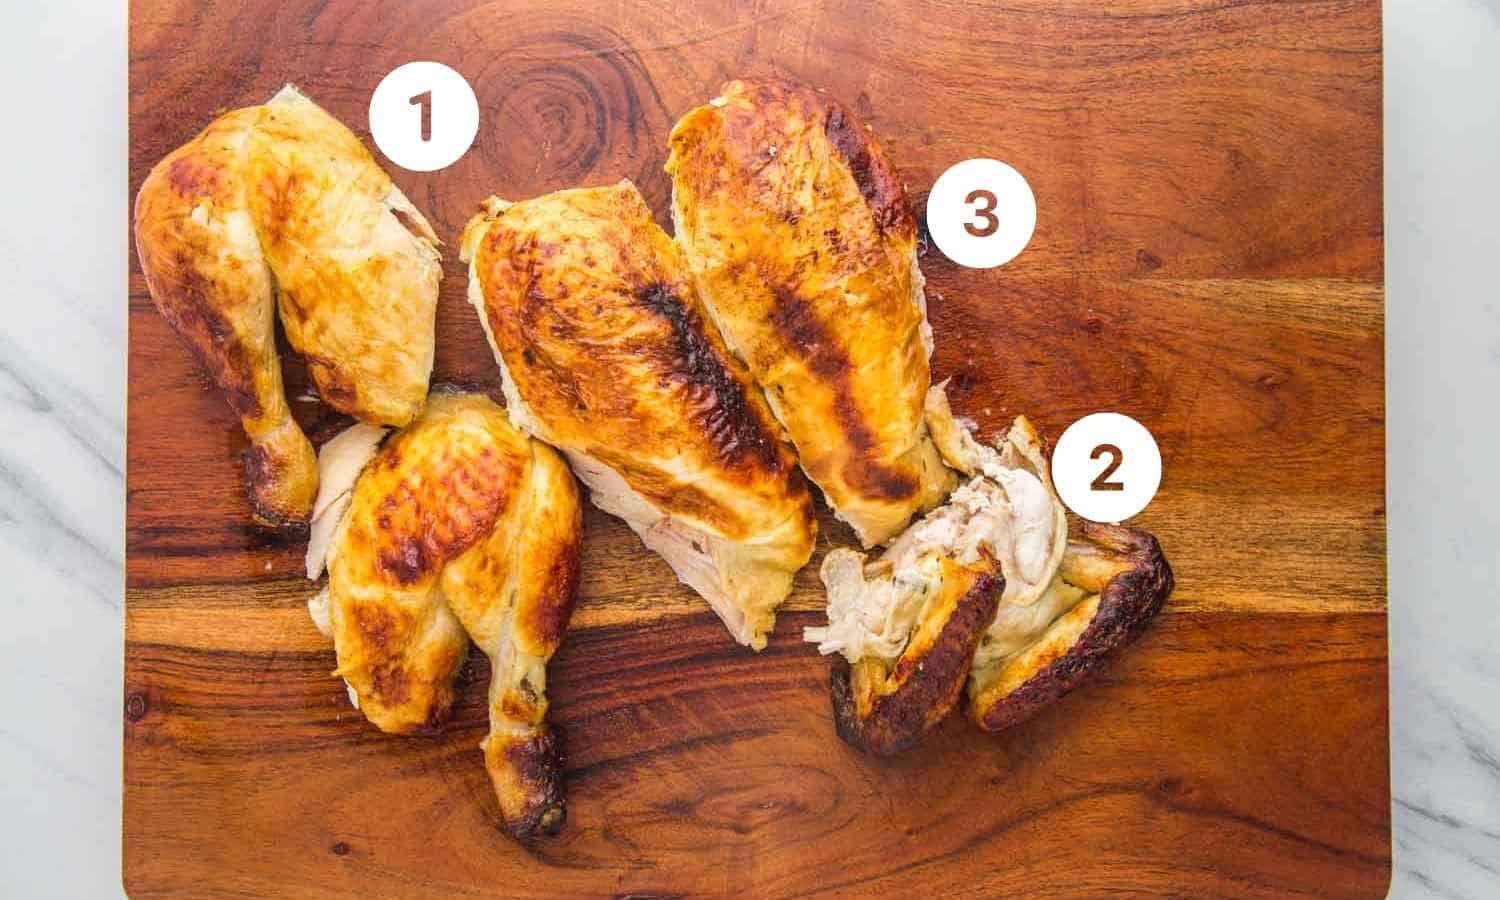 In what order to carve a chicken, carved chicken on a wooden cutting board with numbers on each part